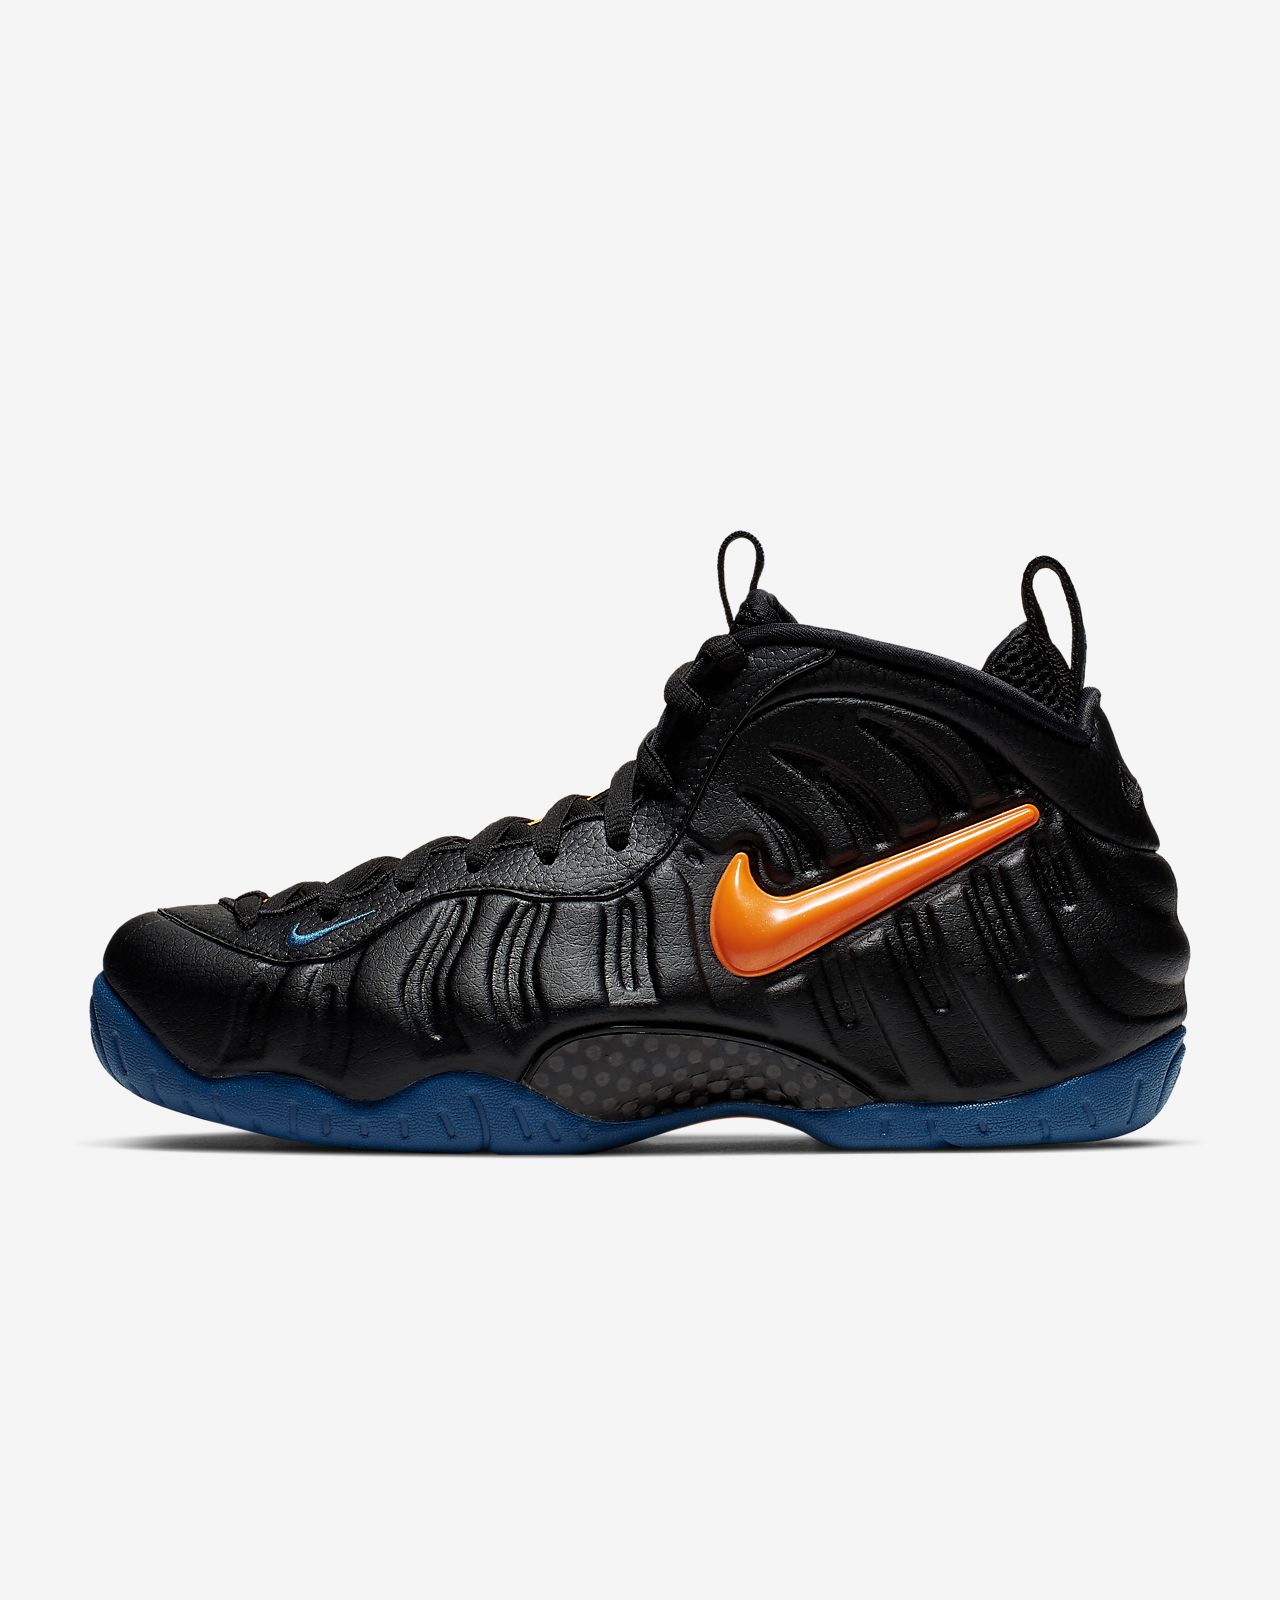 Nike Foamposite Alternate Galaxy 2018 Official Images